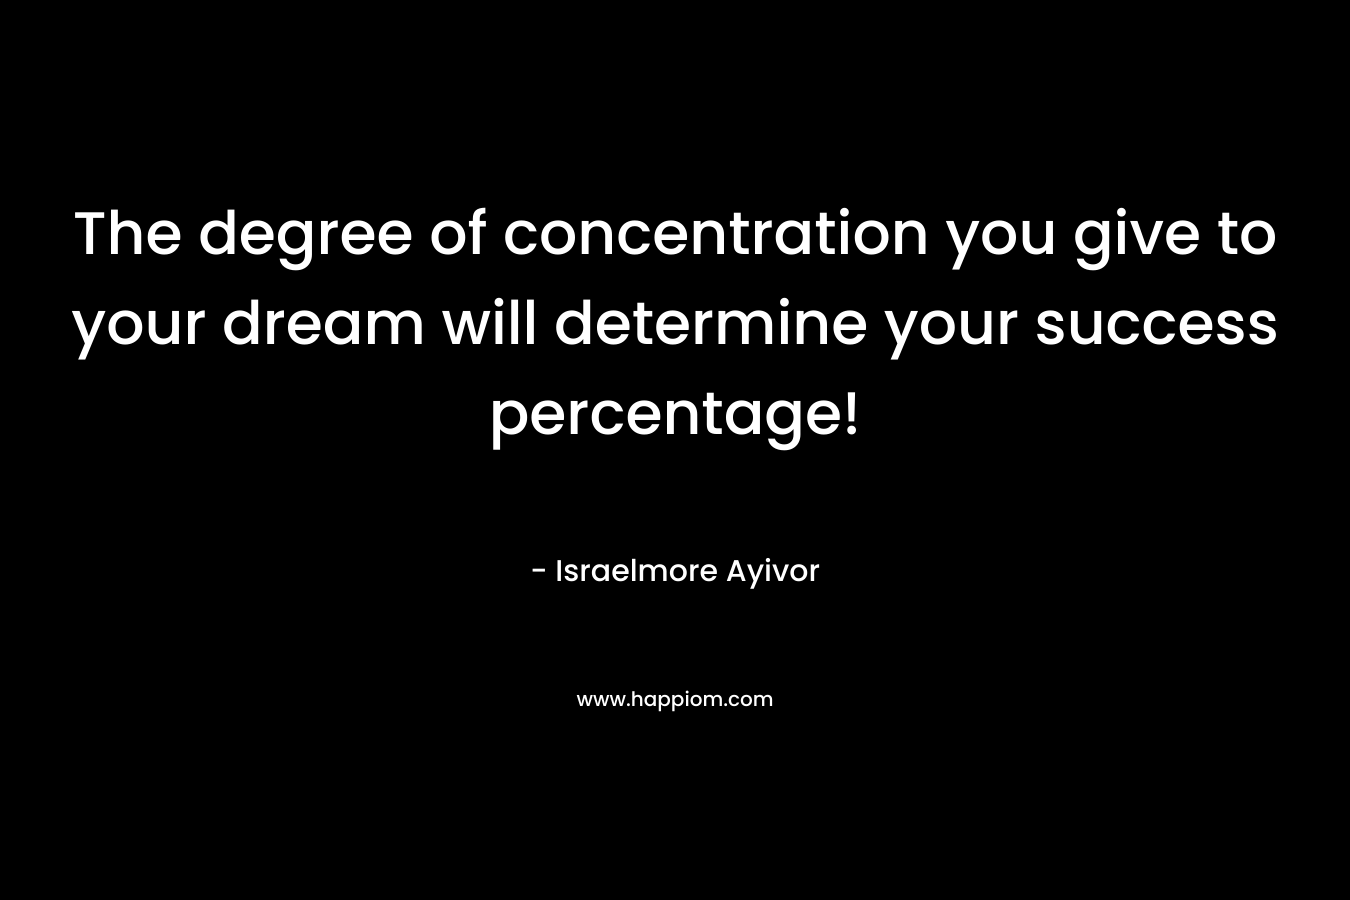 The degree of concentration you give to your dream will determine your success percentage! – Israelmore Ayivor